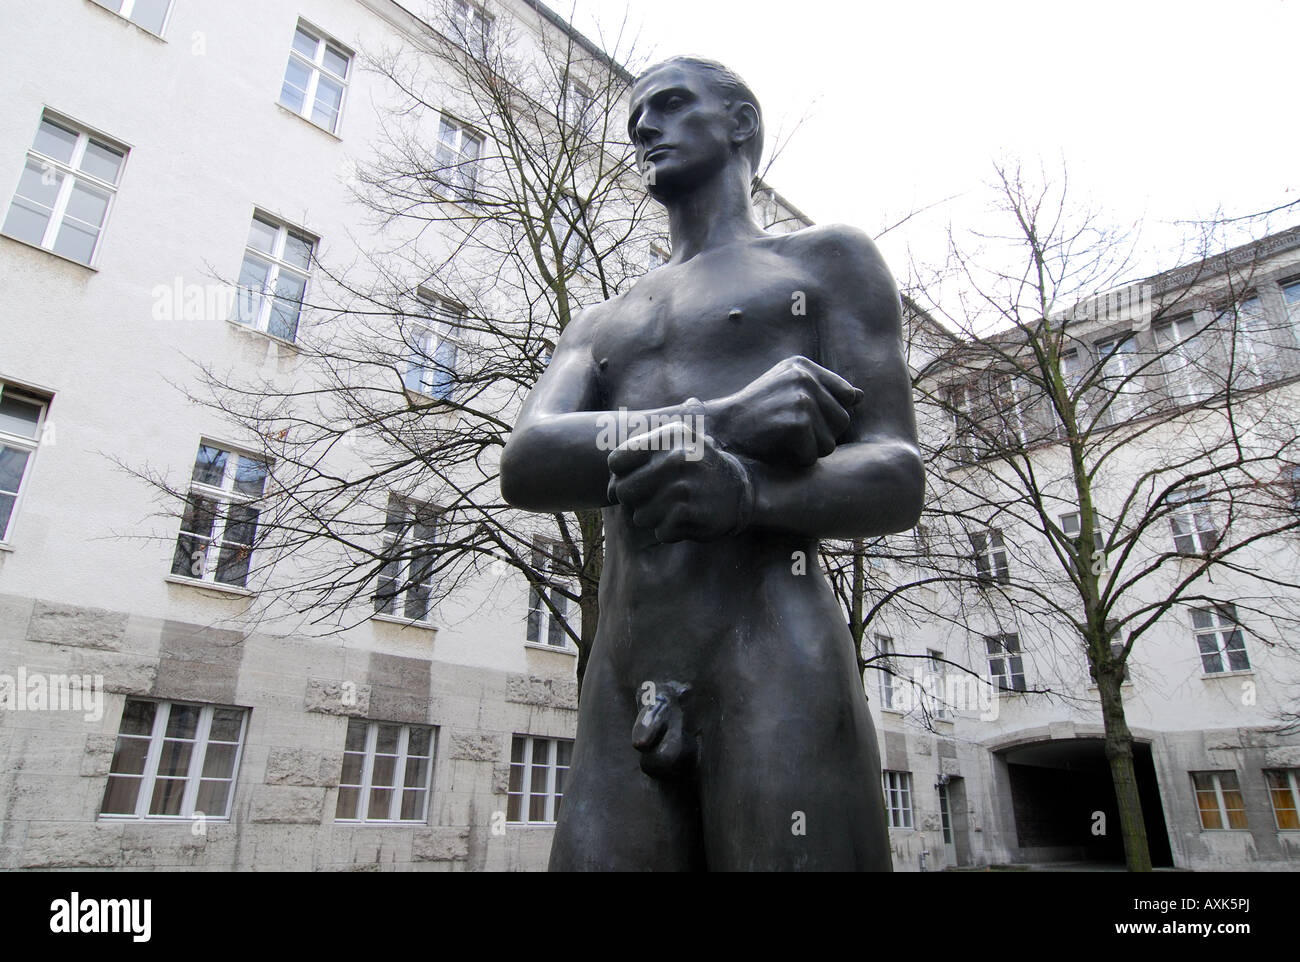 Image result for Stauffenberg statue in German foreign ministry